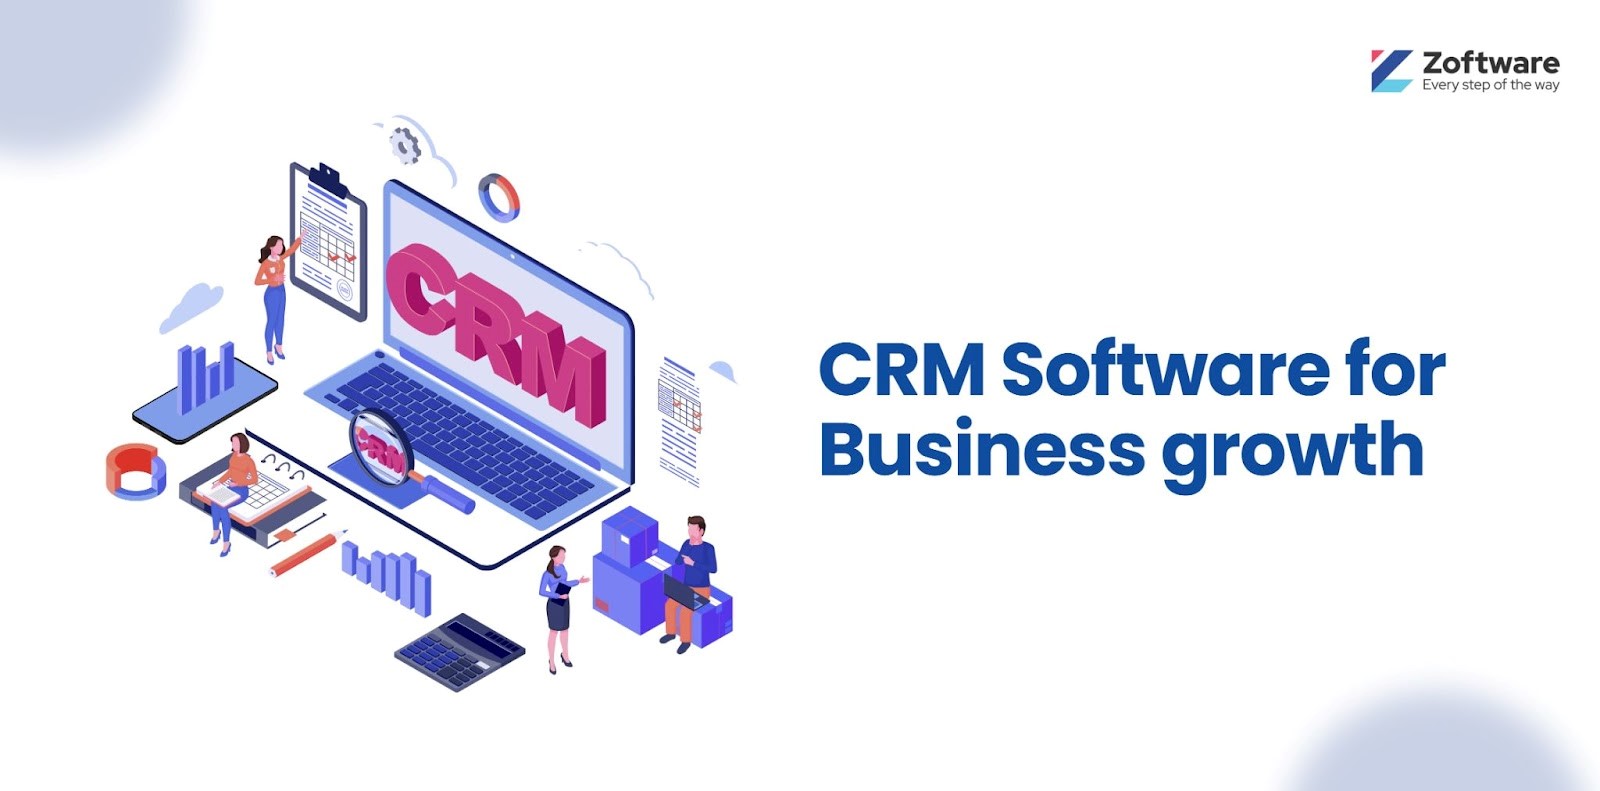 CRM Software for Business Growth and Performance